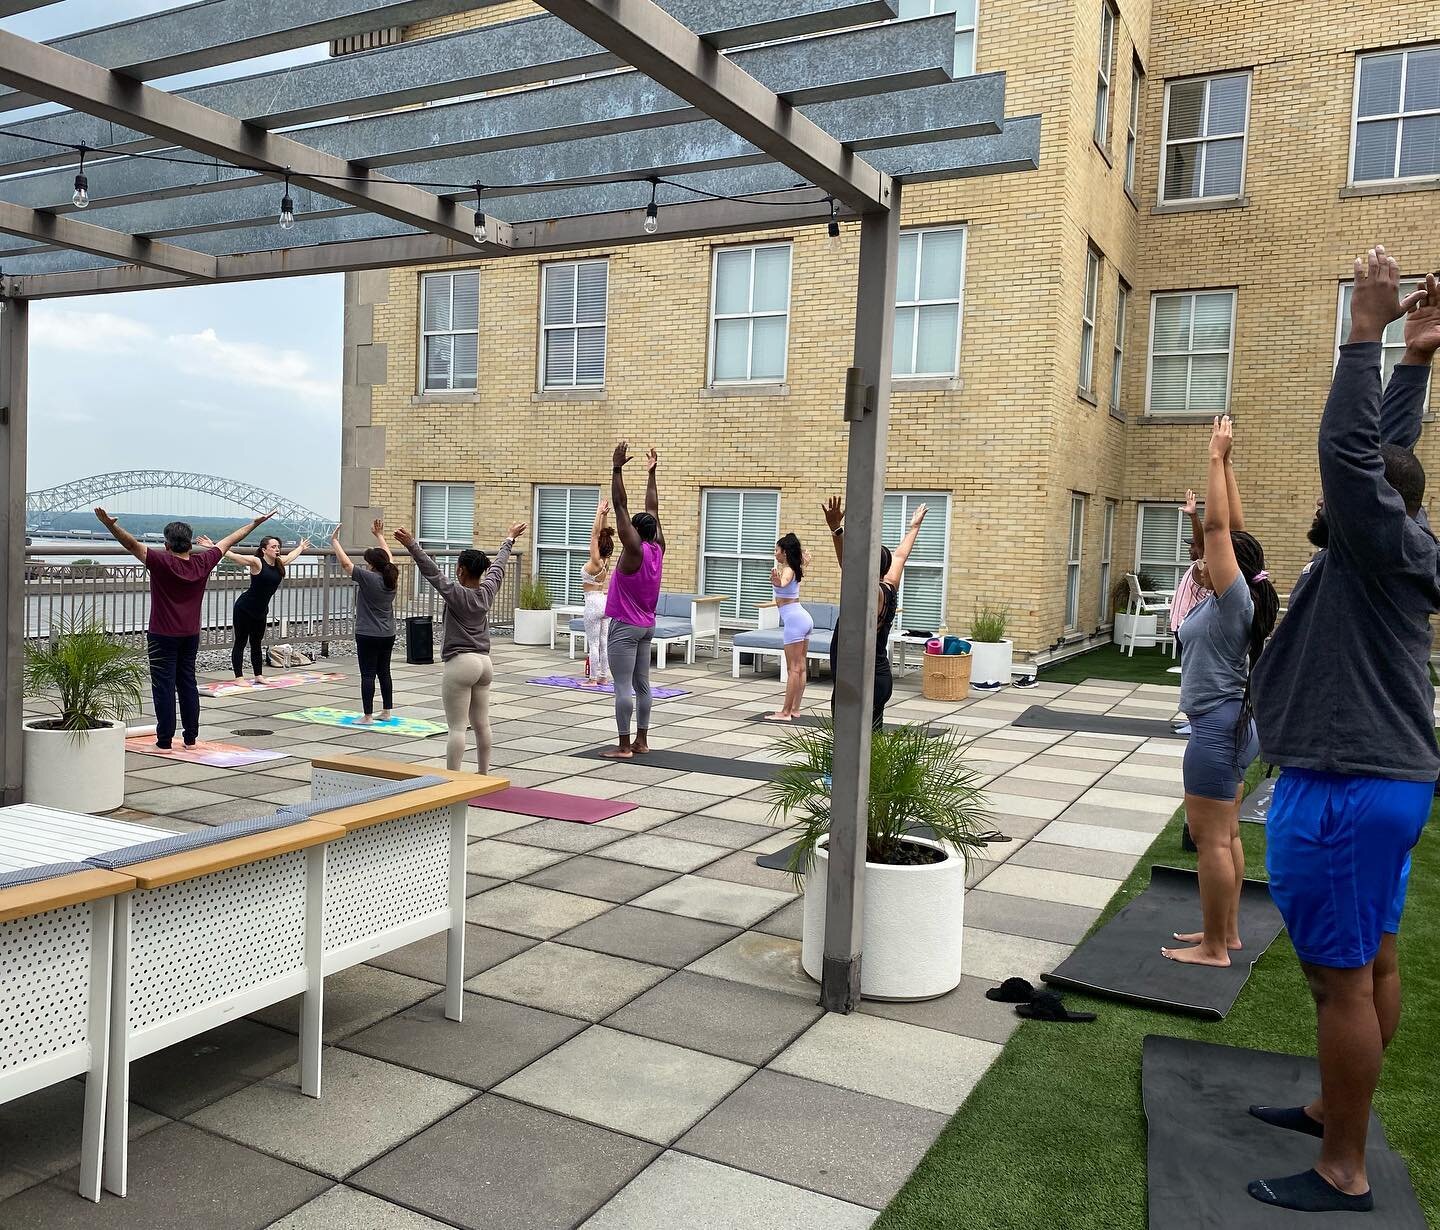 Fun yoga times @metro67_memphis ! I&rsquo;m so grateful to teach such a great group! They have such a beautiful rooftop area and such a positive community! Can&rsquo;t wait for the next rooftop class!

#901downtownyoga #downtownyogamemphis #downtownm